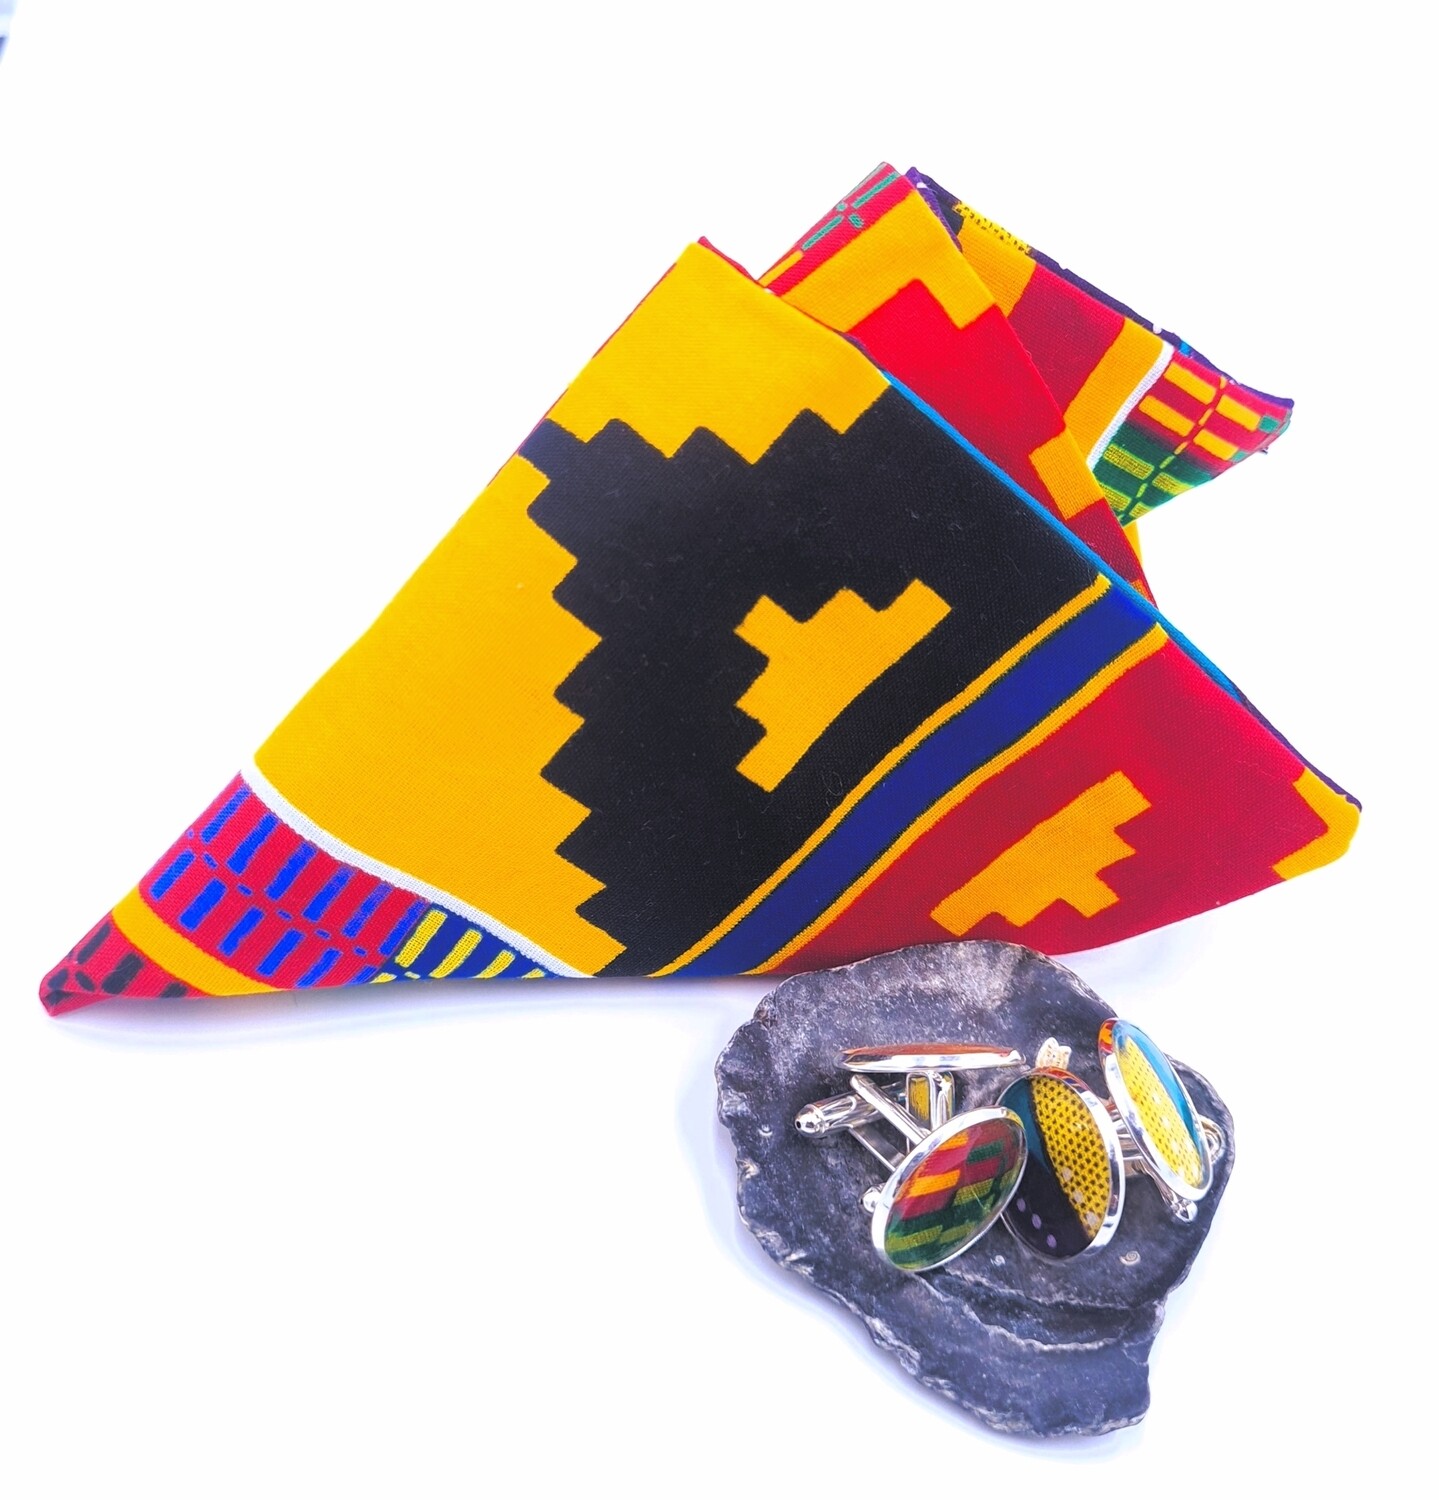 Reversible Kente and African wax print pocket square with cufflinks | men's accessories | Ankara pocket square | African cufflinks